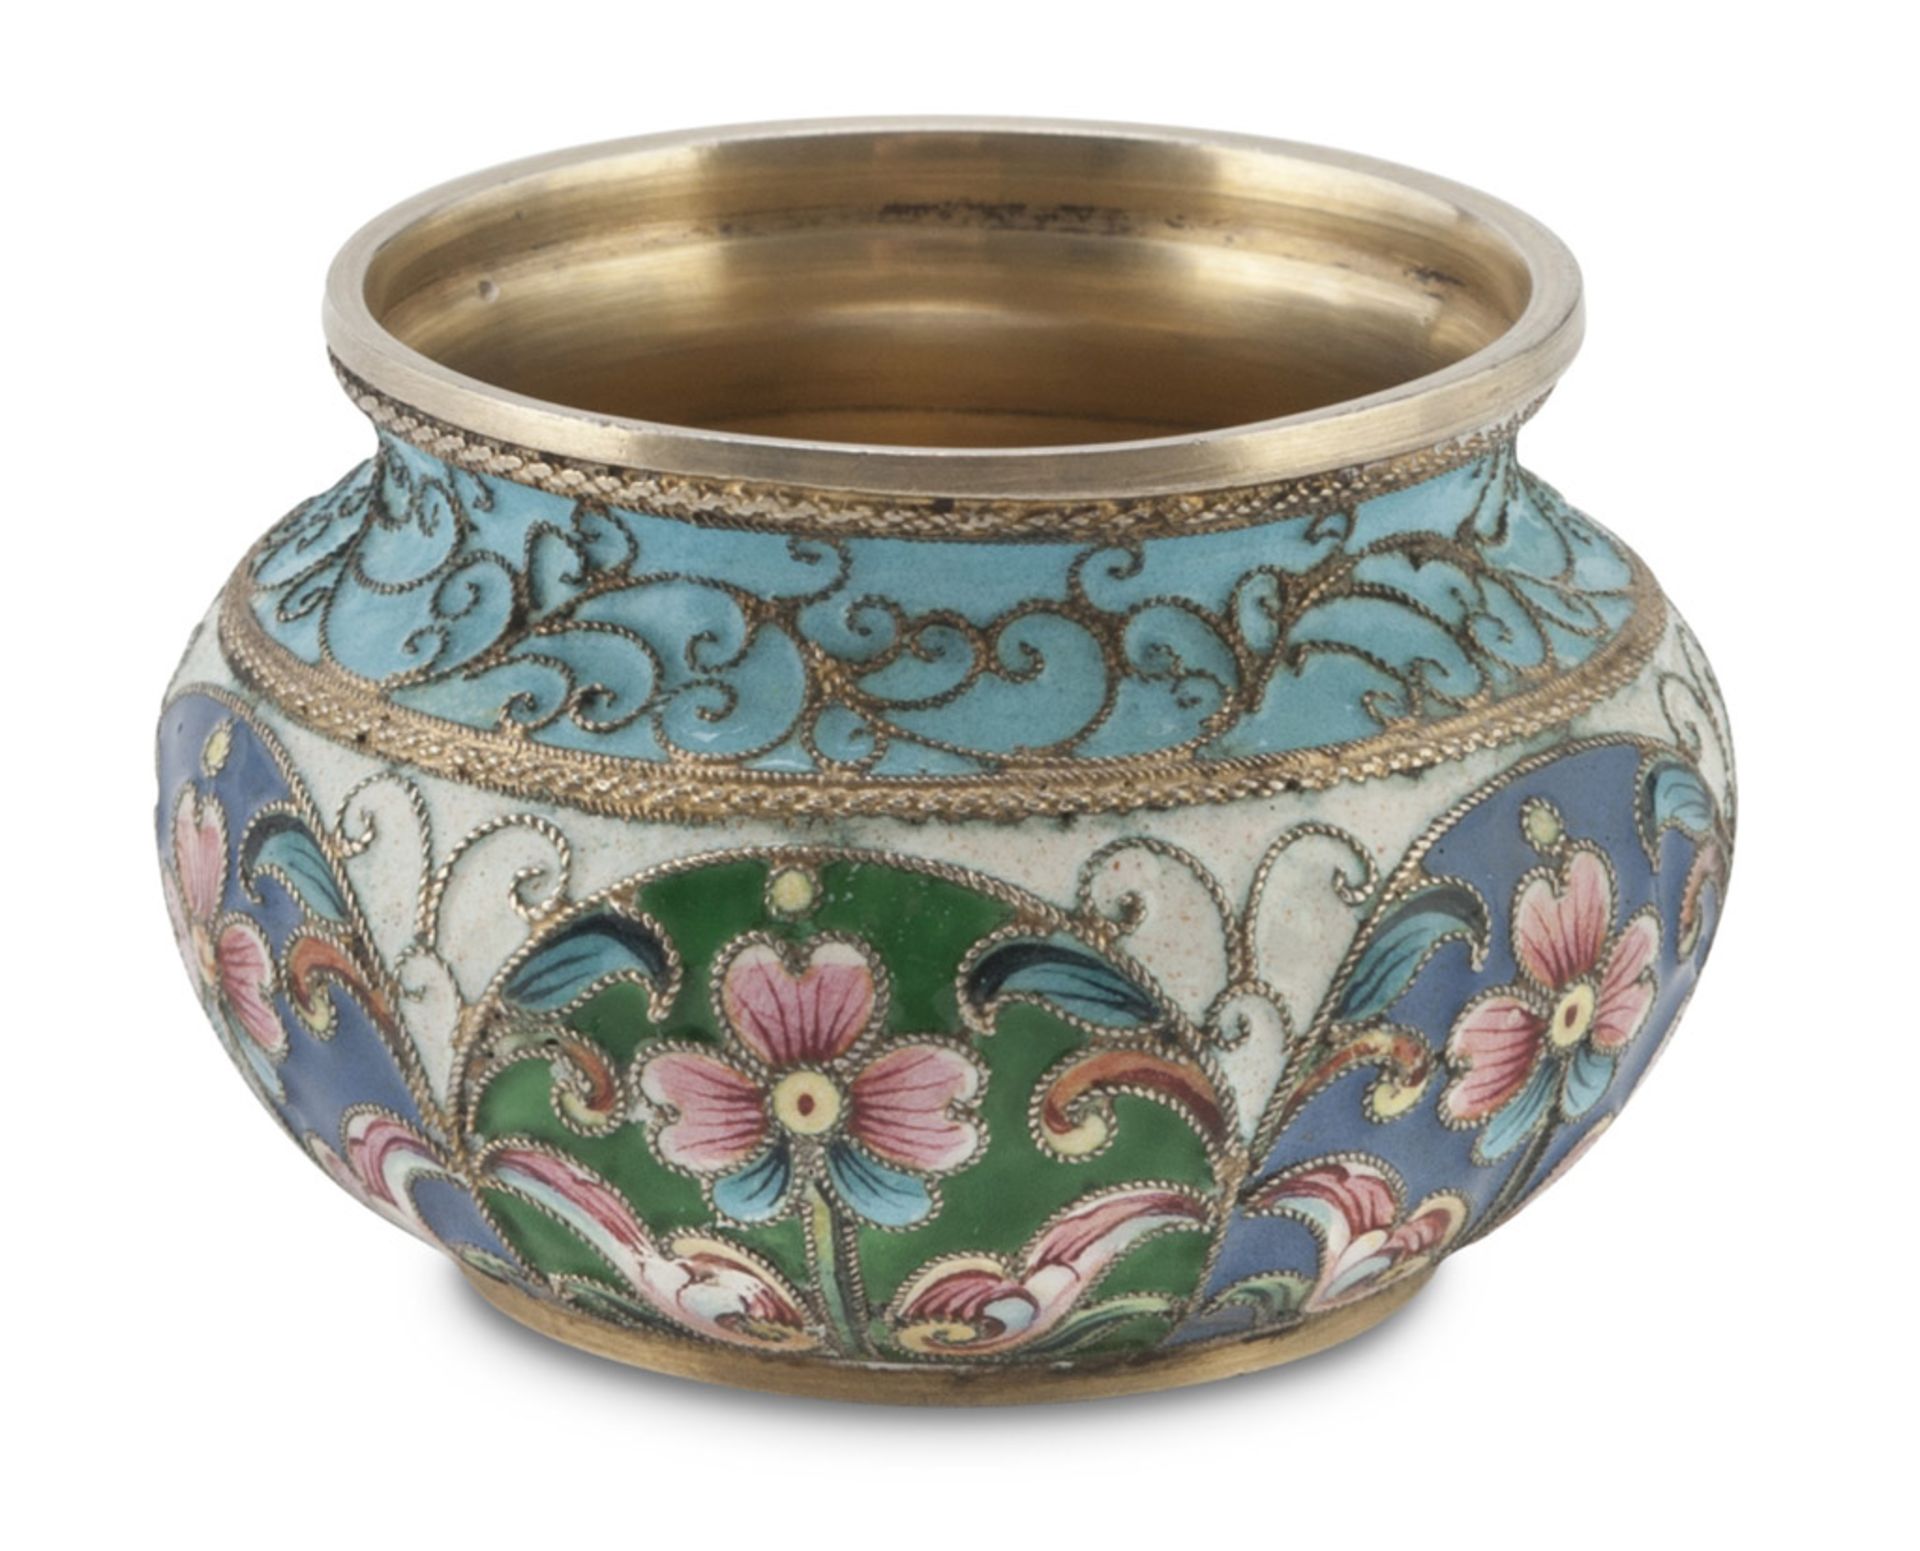 SMALL OINTMENTVASE IN SILVER AND ENAMEL, RUSSIA 1899/1908 body decorated in polychromy with motifs